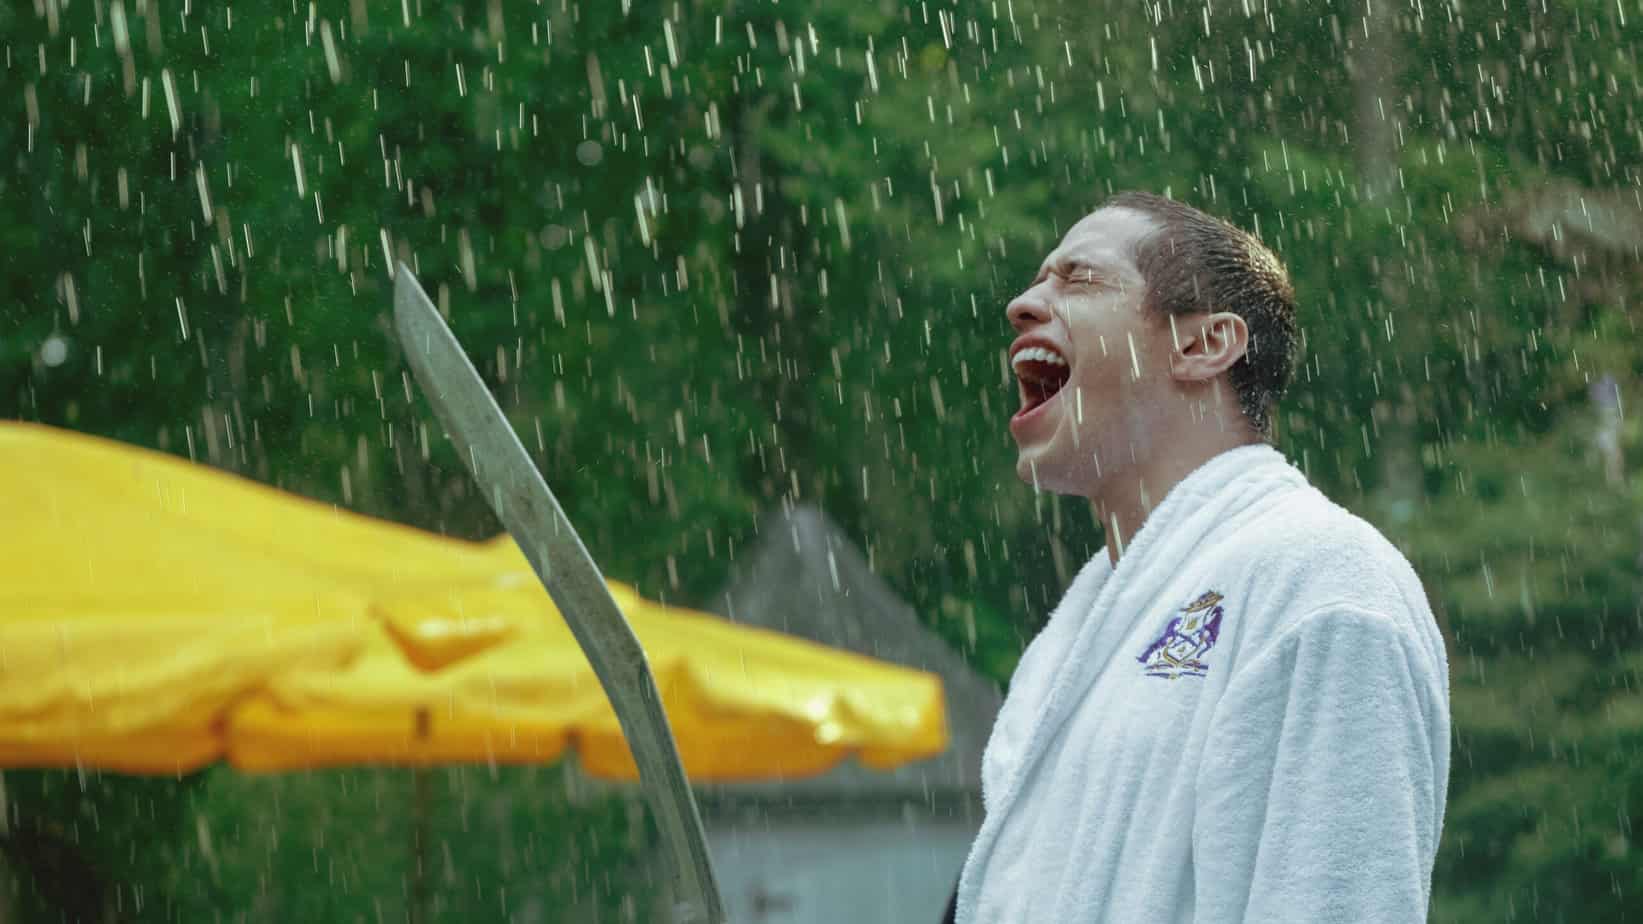 Pete DAvidson quotes from Bodies Bodies Bodies. Man standing in the rain in a robe holding a sword.